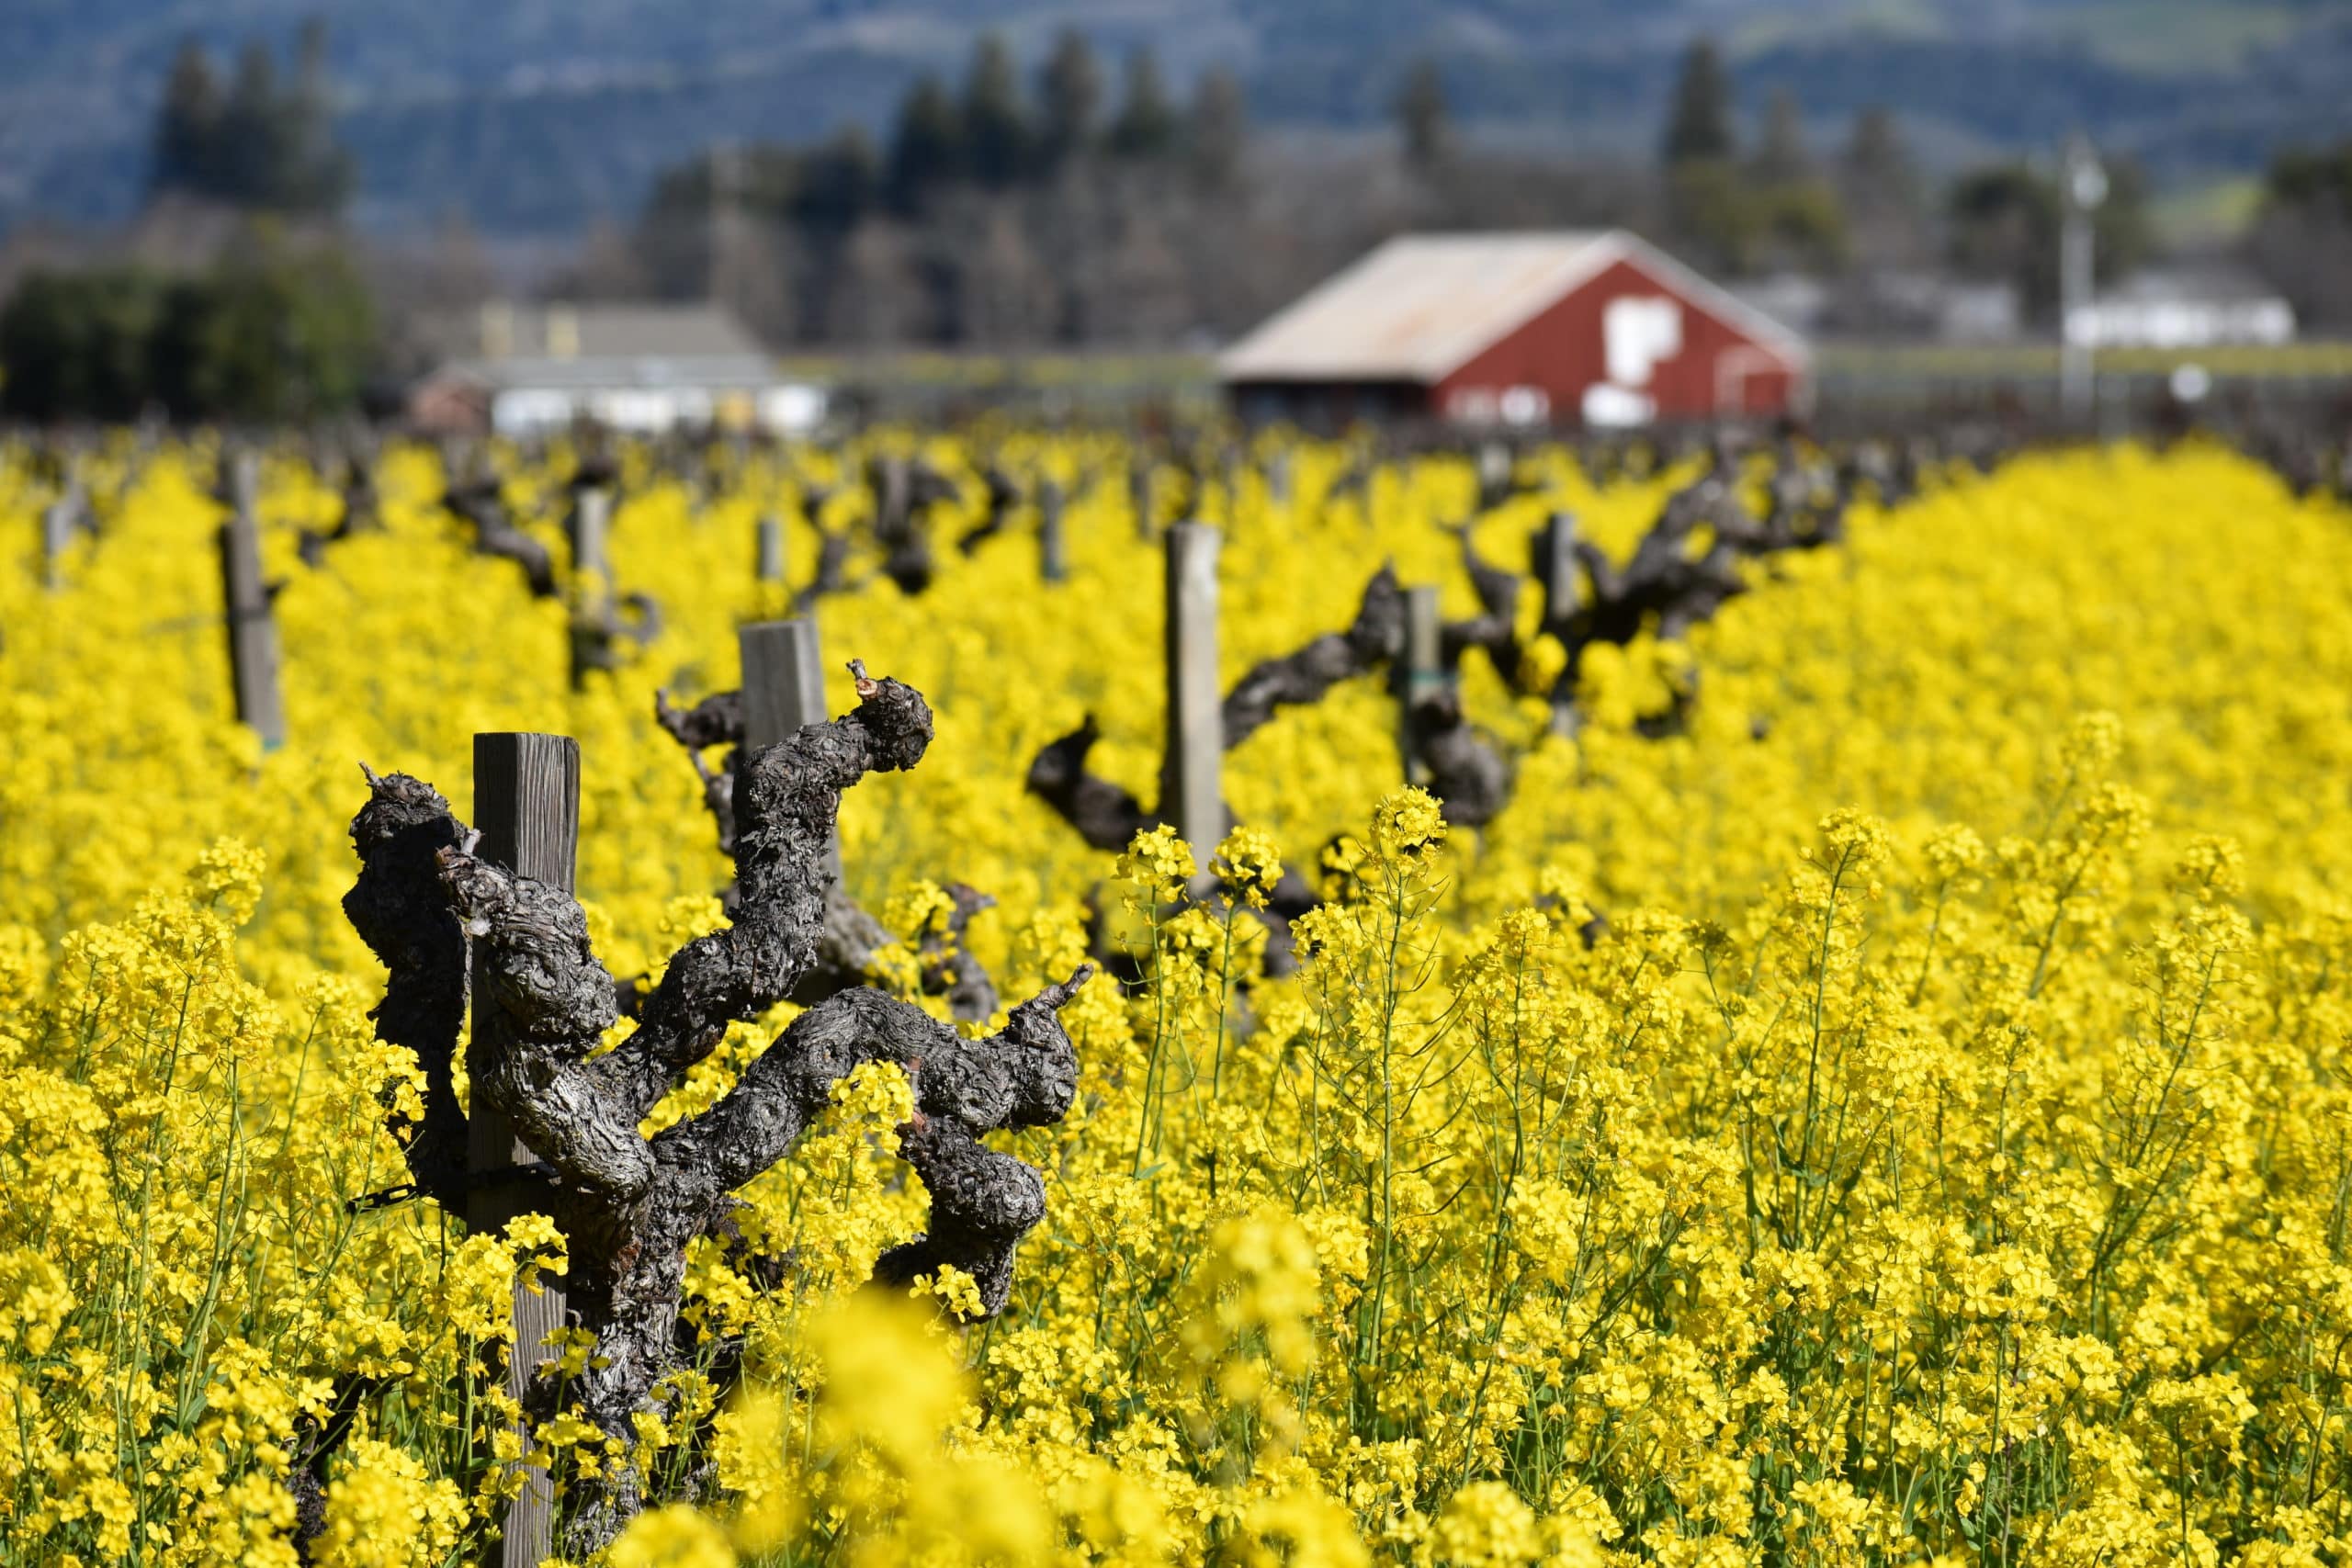 Mature vines with mustard flowers surrounding with a red barn in the background at Morisoli Vineyard in Rutherford California.